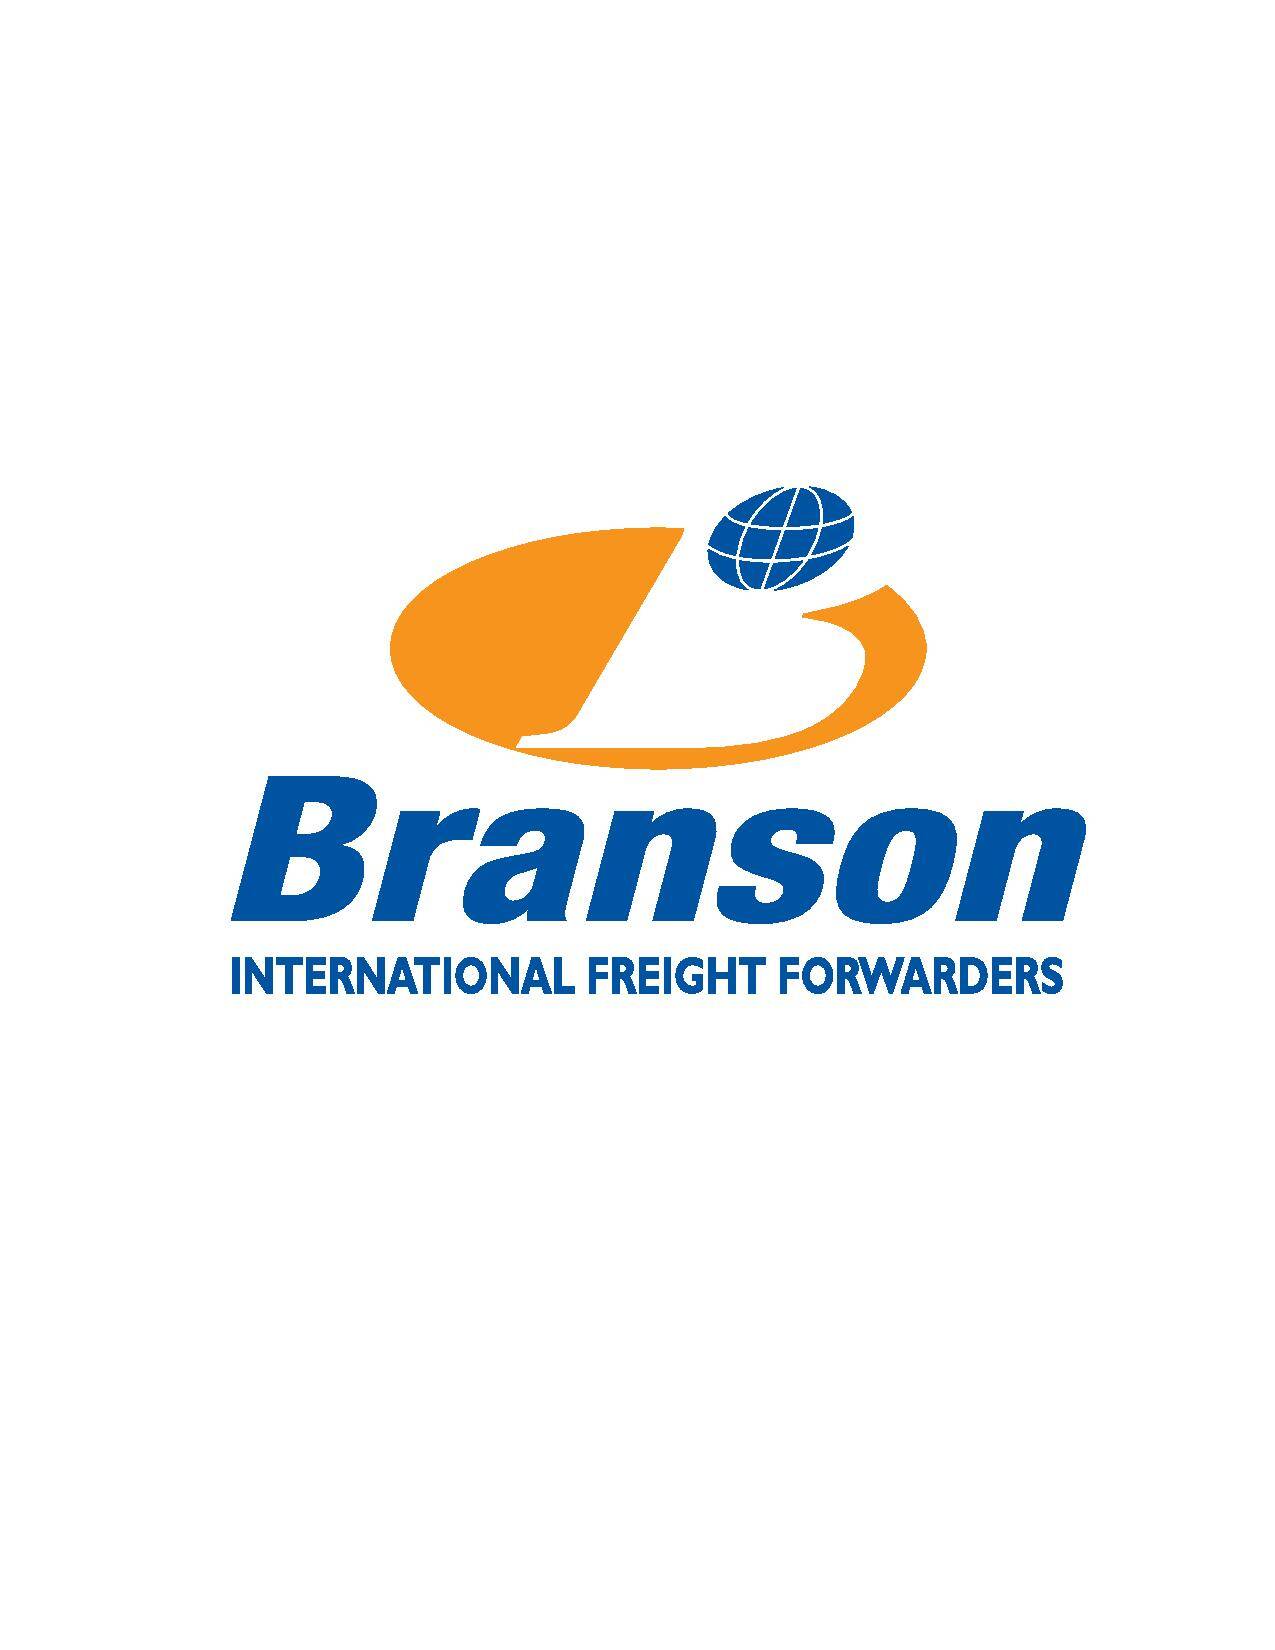 branson_logo_with_tag_-_Copy-page-001.jpg